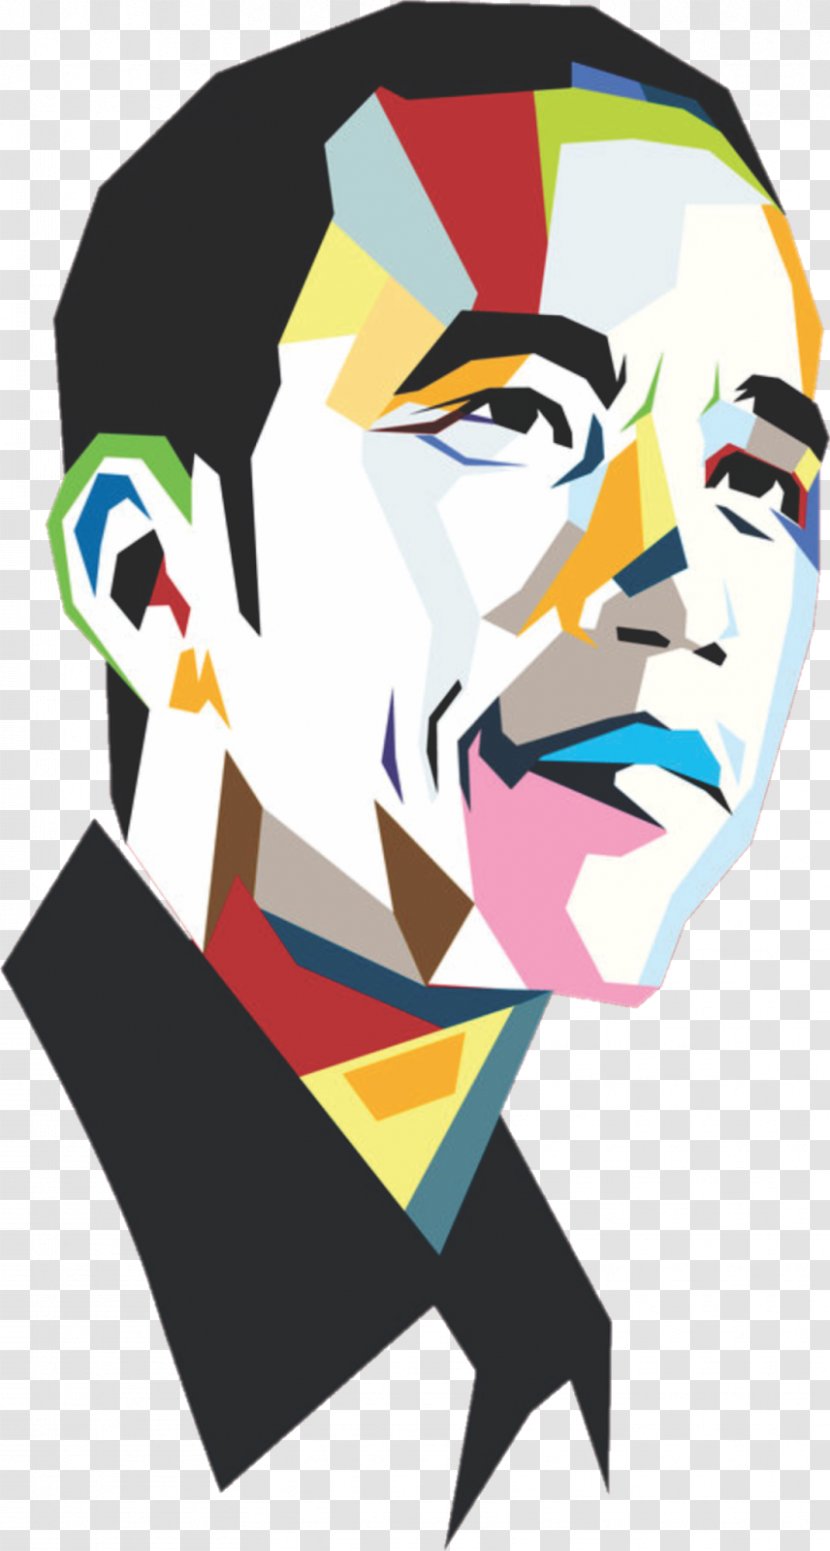 President Of Indonesia Indonesian General Election, 2019 Presidential 2014 Politician - National Land Agency - Jokowi Transparent PNG